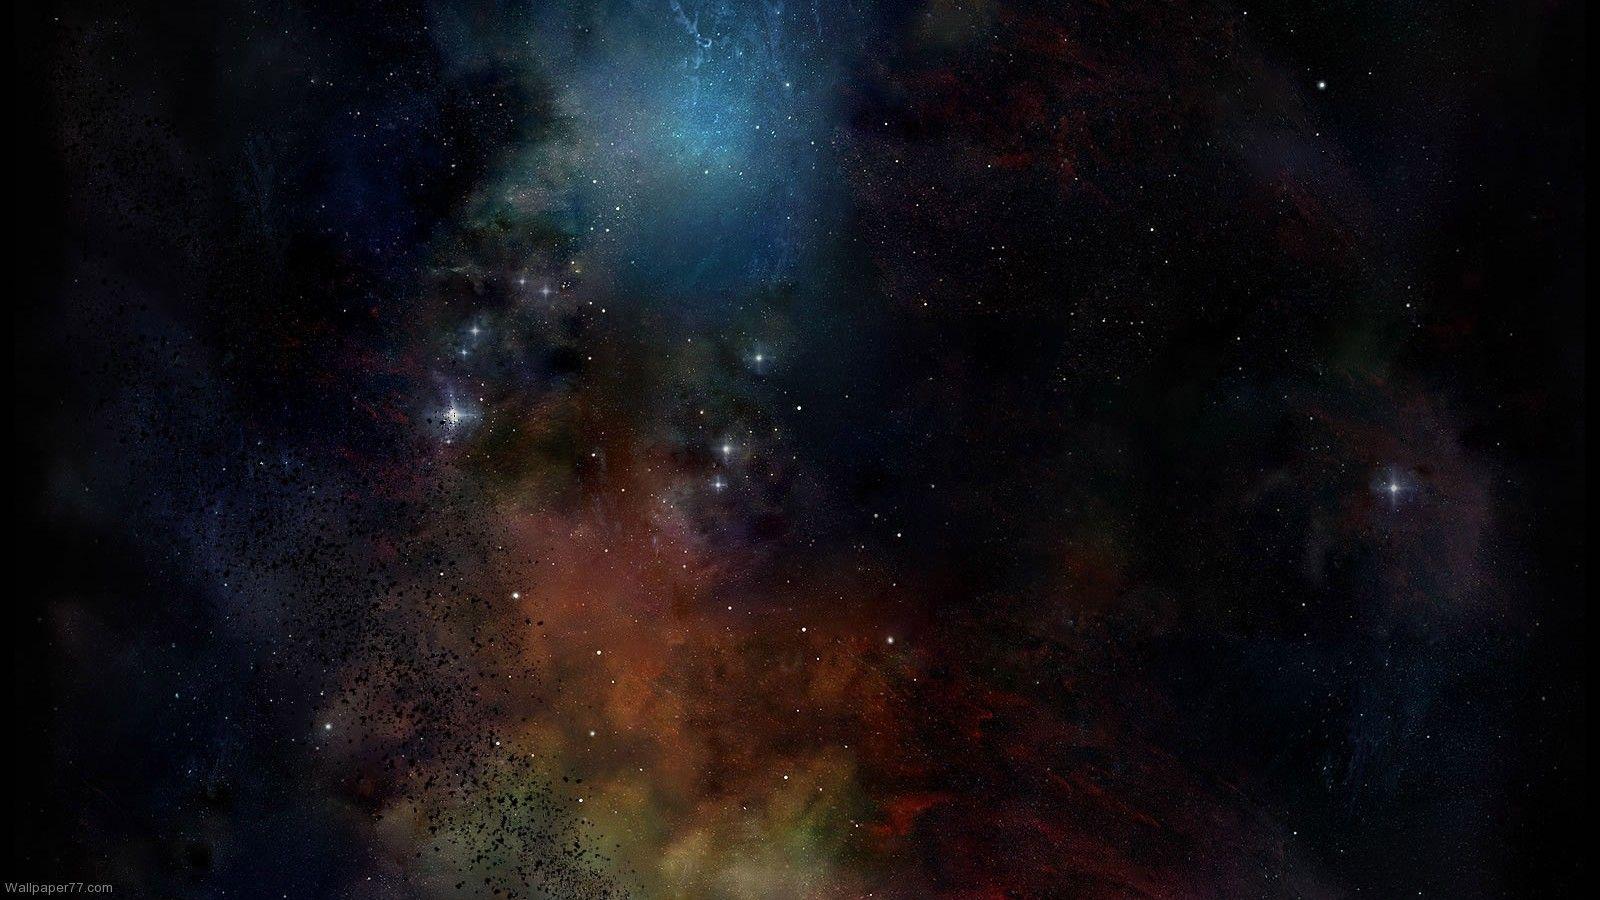 Colorful Space, 1600x900 pixels, Wallpaper tagged Galaxy